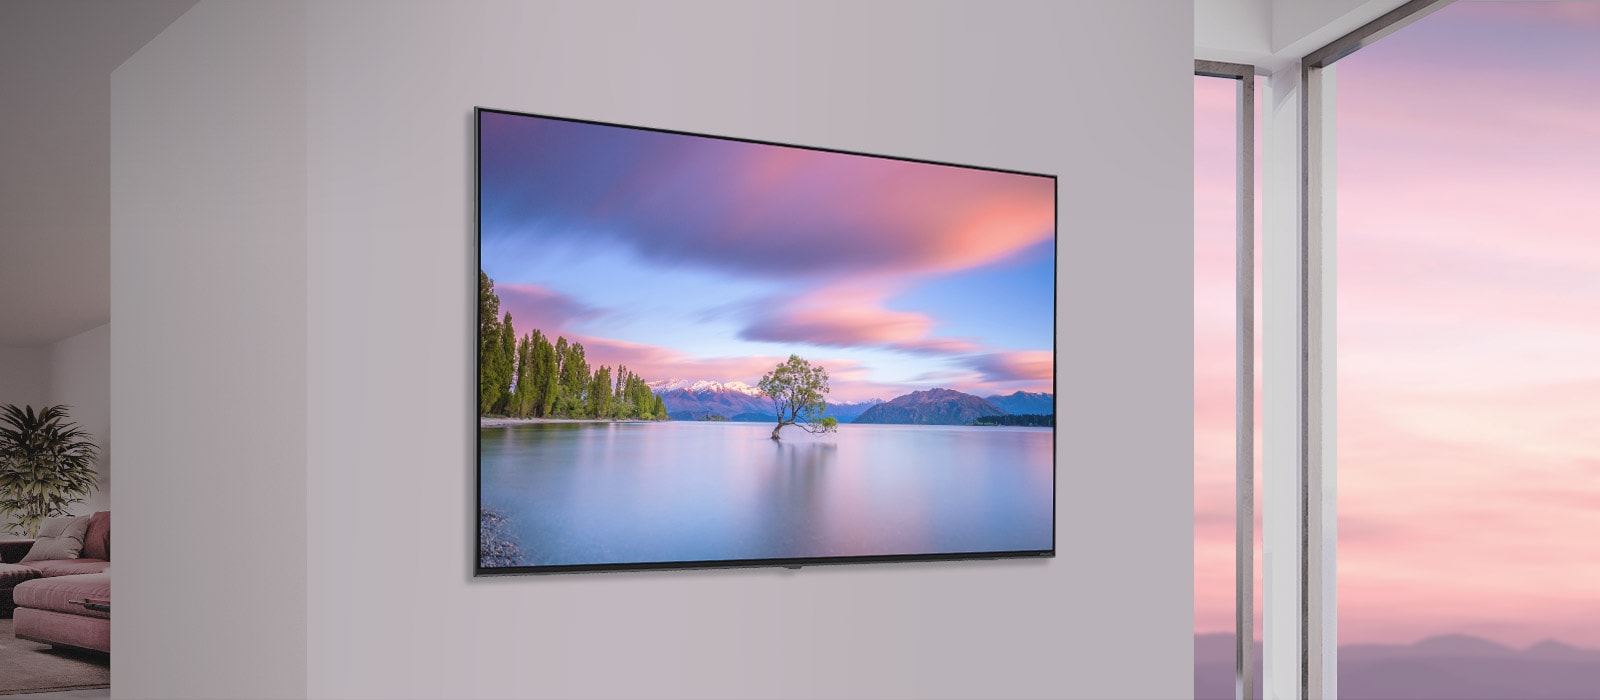 A scene depicting a flat-screen LG NanoCell TV mounted on a white wall. As the image scrolls from side to side the image changes from a 55-inch to 86-inch TV